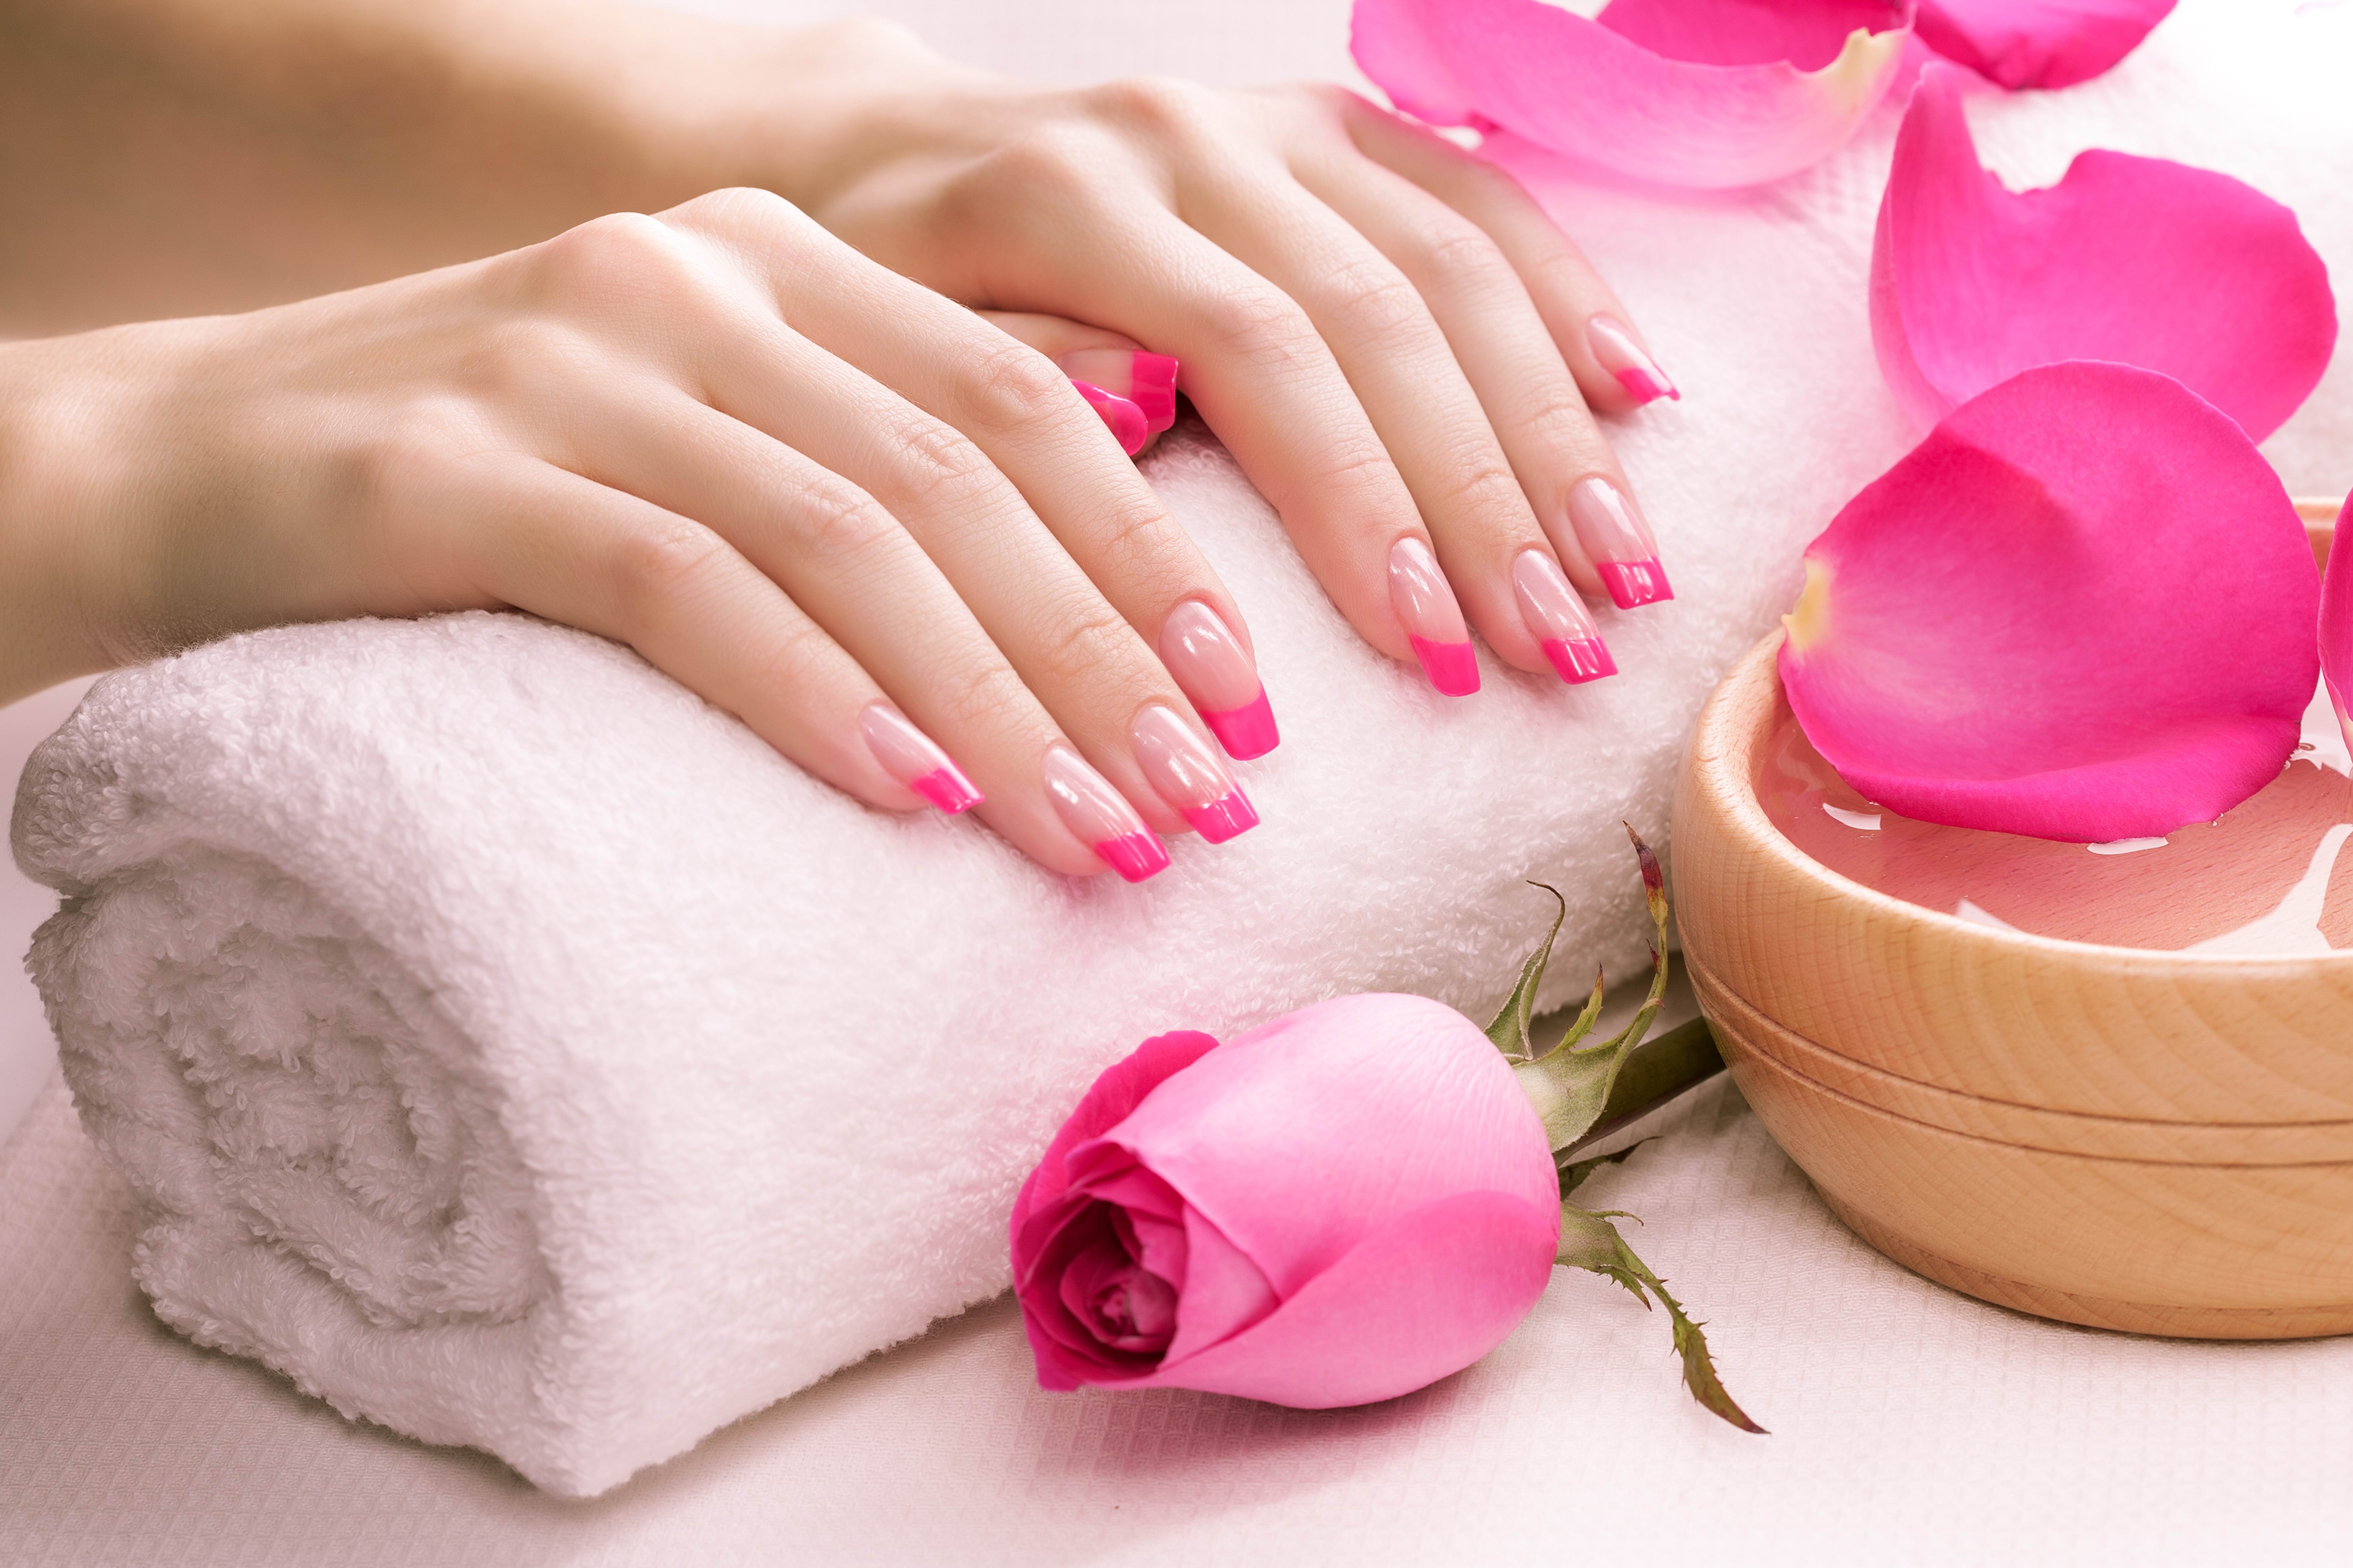 pink manicure with fragrant rose petals and towel